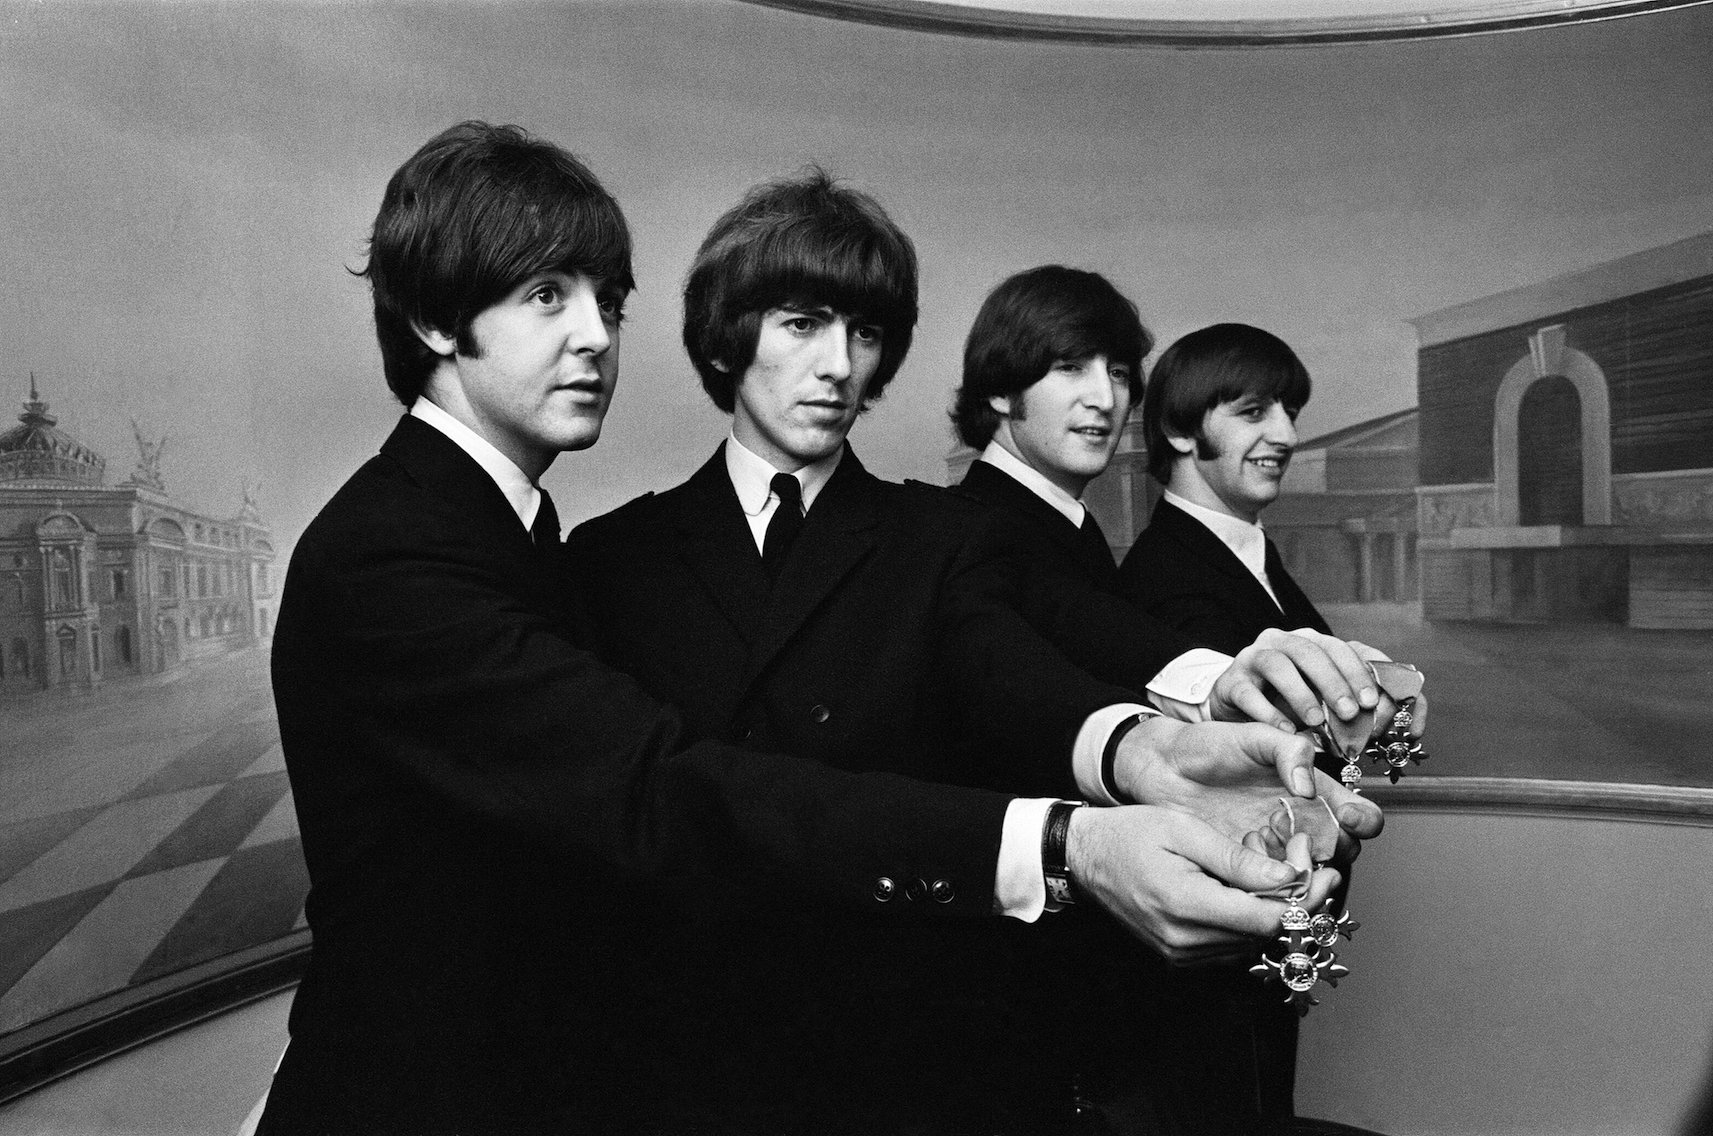 The Beatles show off their MBE medals at Buckingham Palace